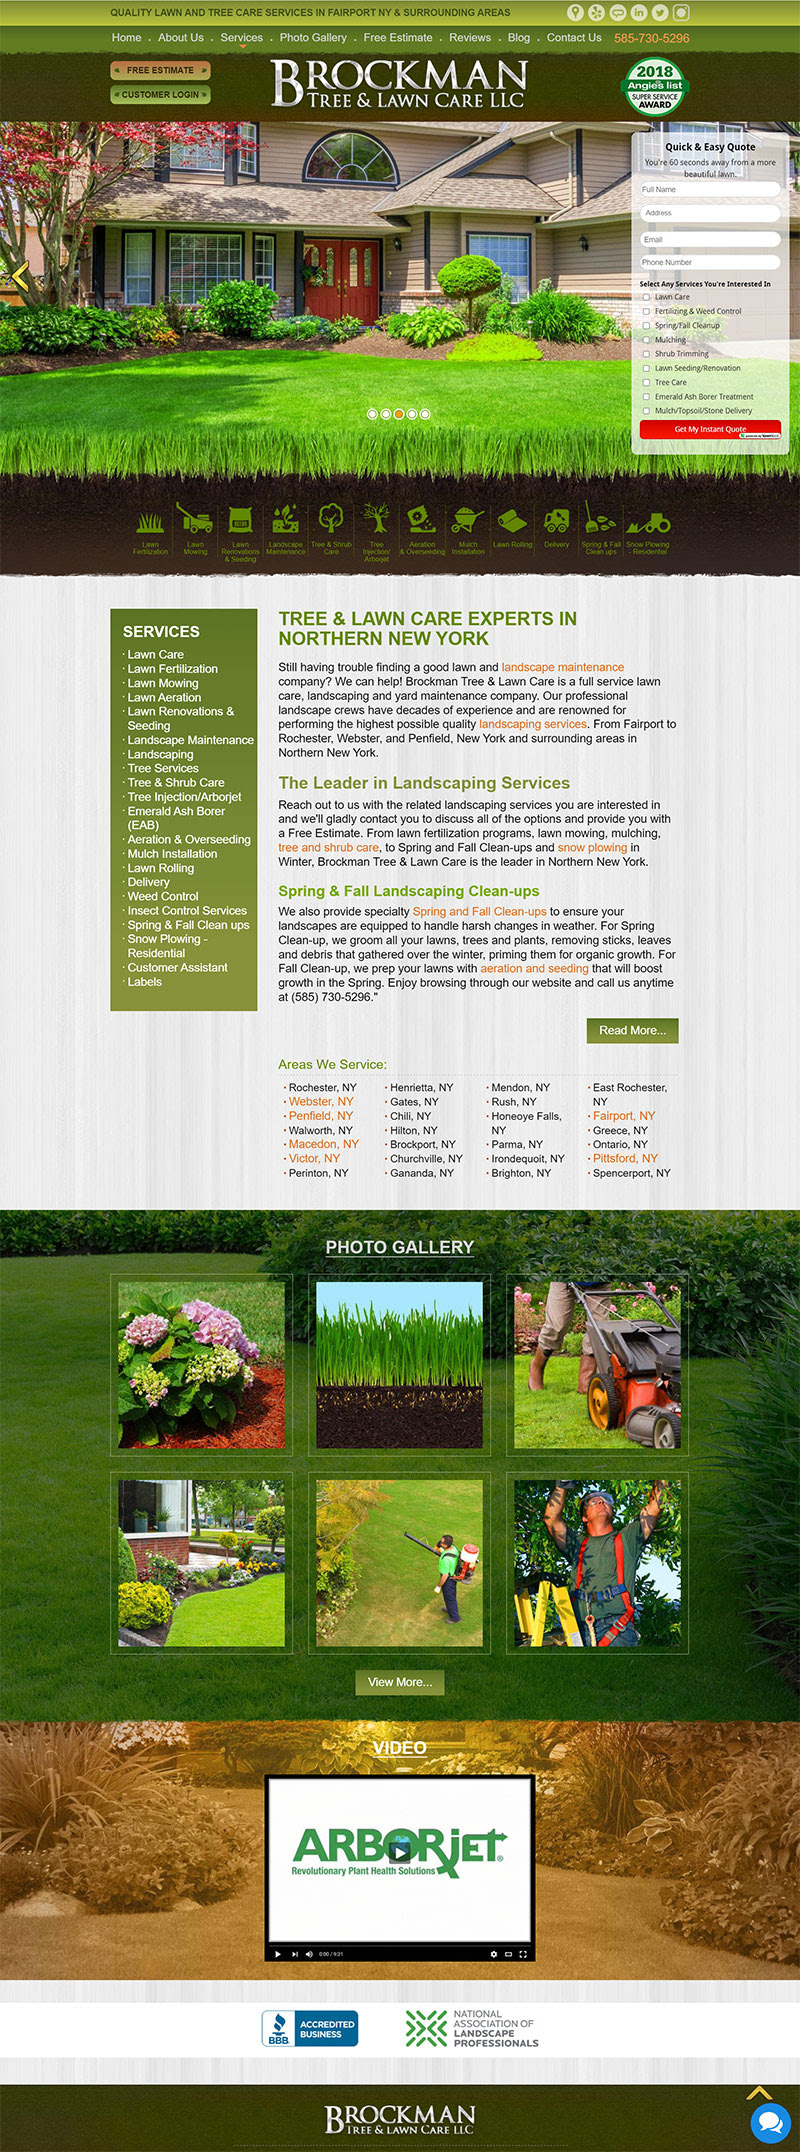 lawn care business financial plan